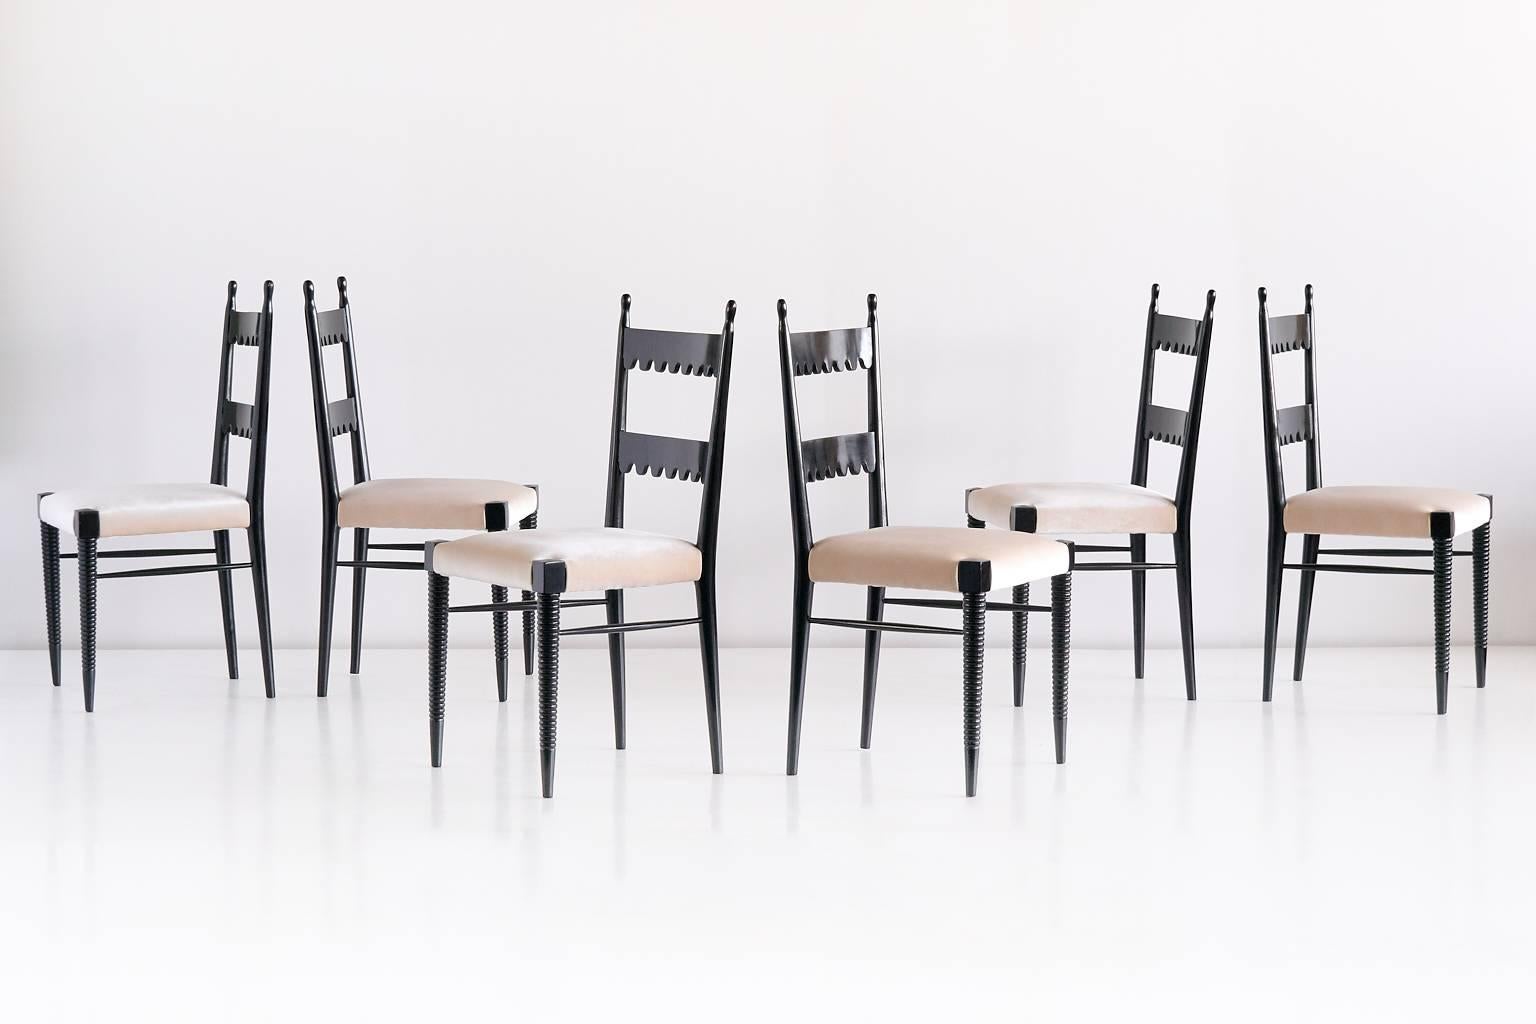 A rare set of six dining chairs designed by Pier Luigi Colli and produced by his company Colli in the late 1940s. The black lacquered chairs are characterized by the scalloped pattern and carved finials on the backrests, and the carved front legs. A